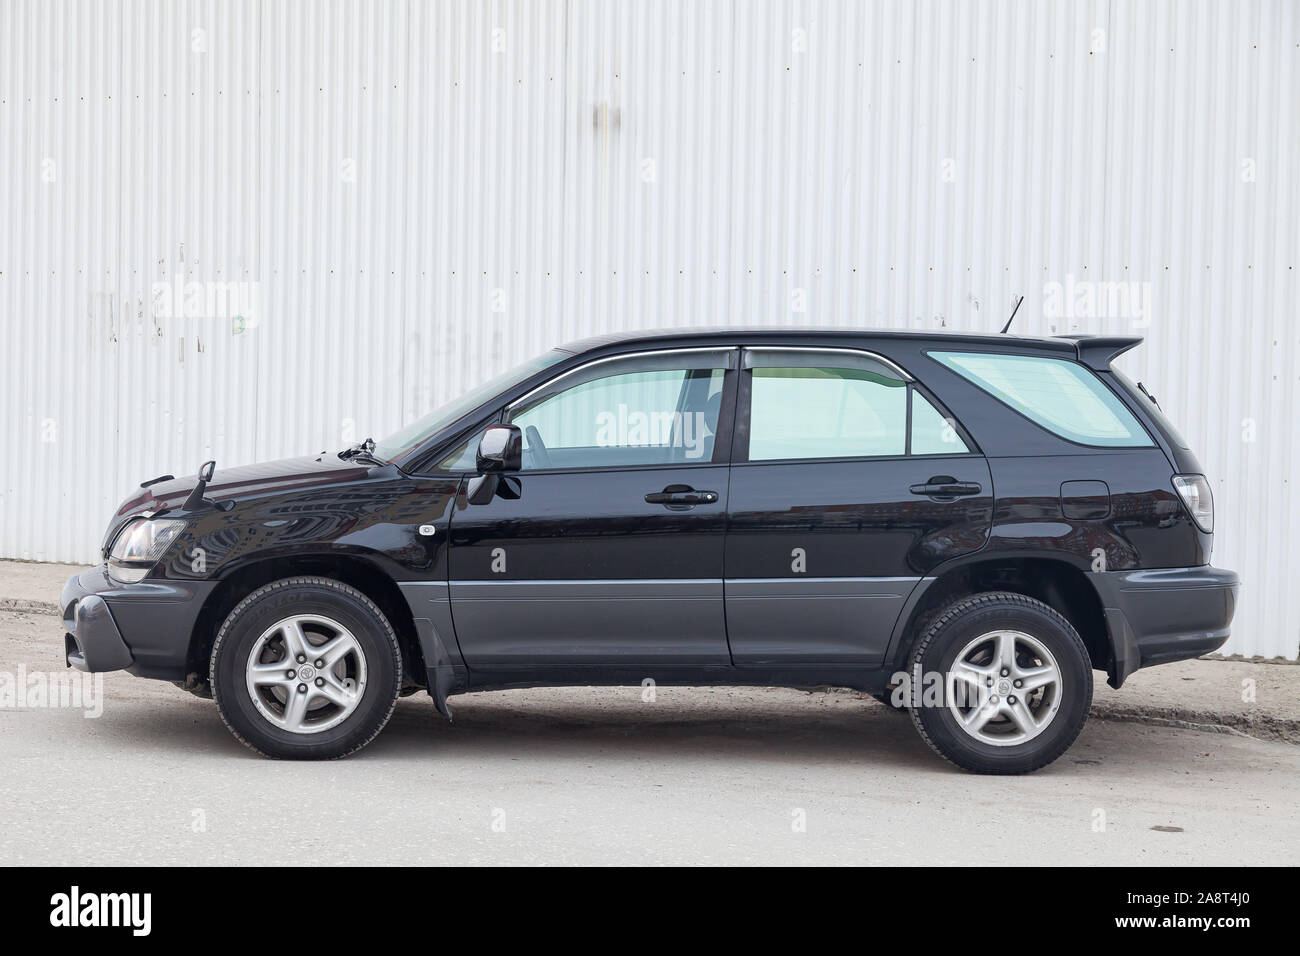 Novosibirsk, Russia - 11.05.2019: Black Toyota Harrier or Lexus RX300 1997 year side view with gray interior in excellent condition in a parking space Stock Photo